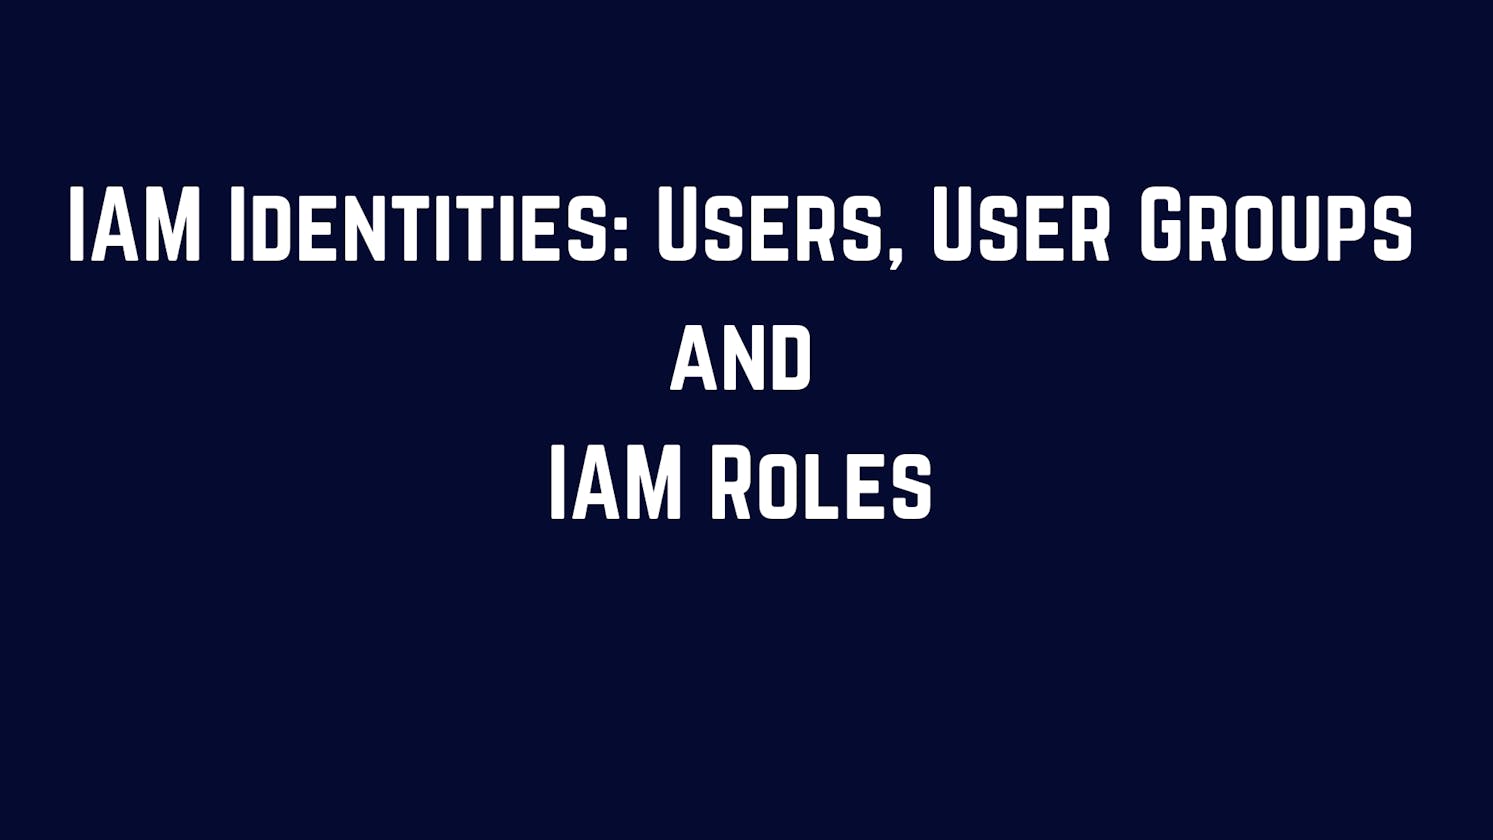 IAM Identities: Users, User Groups and IAM Roles